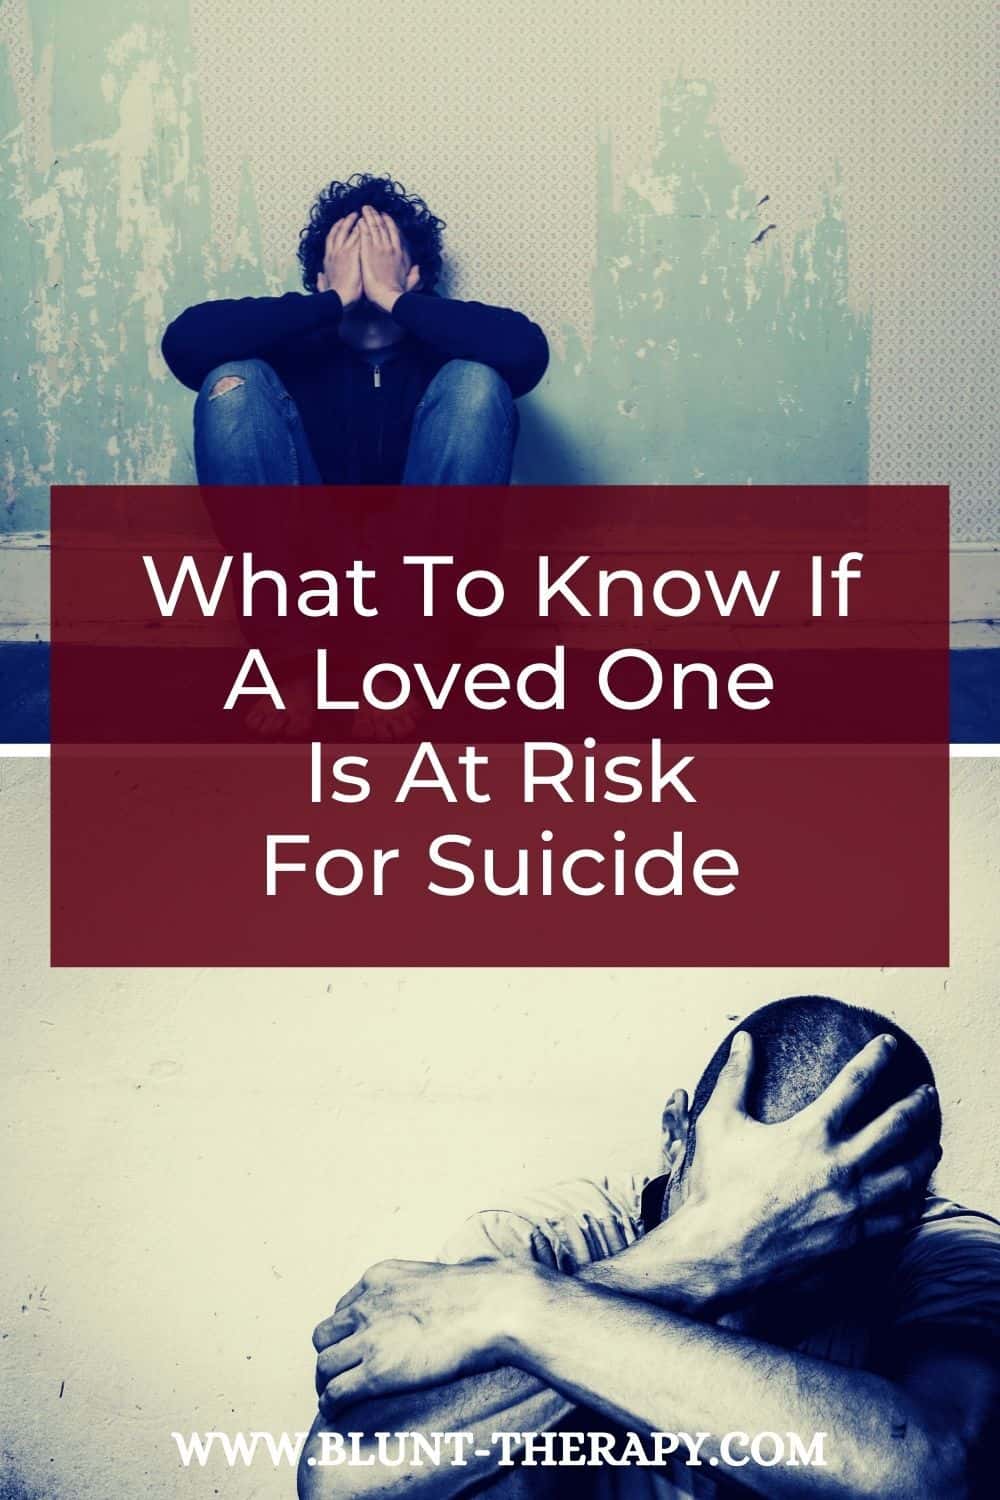 What To Know If A Loved One Is At Risk For Suicide